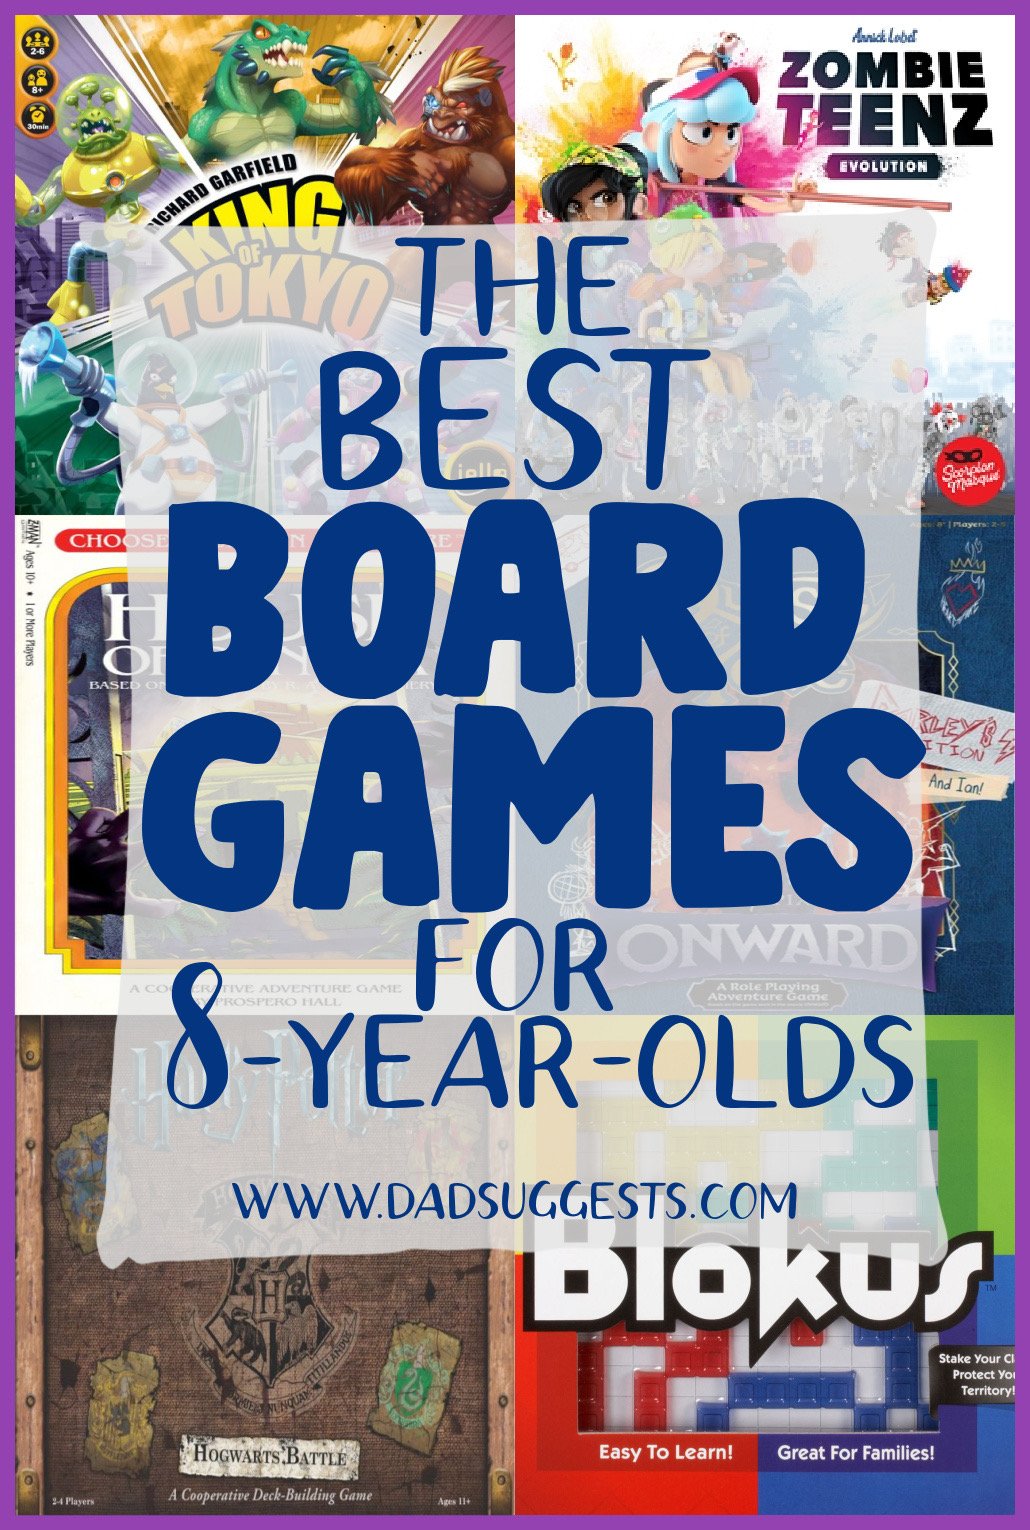 The Best Award Winning Games for Kids for Each Age